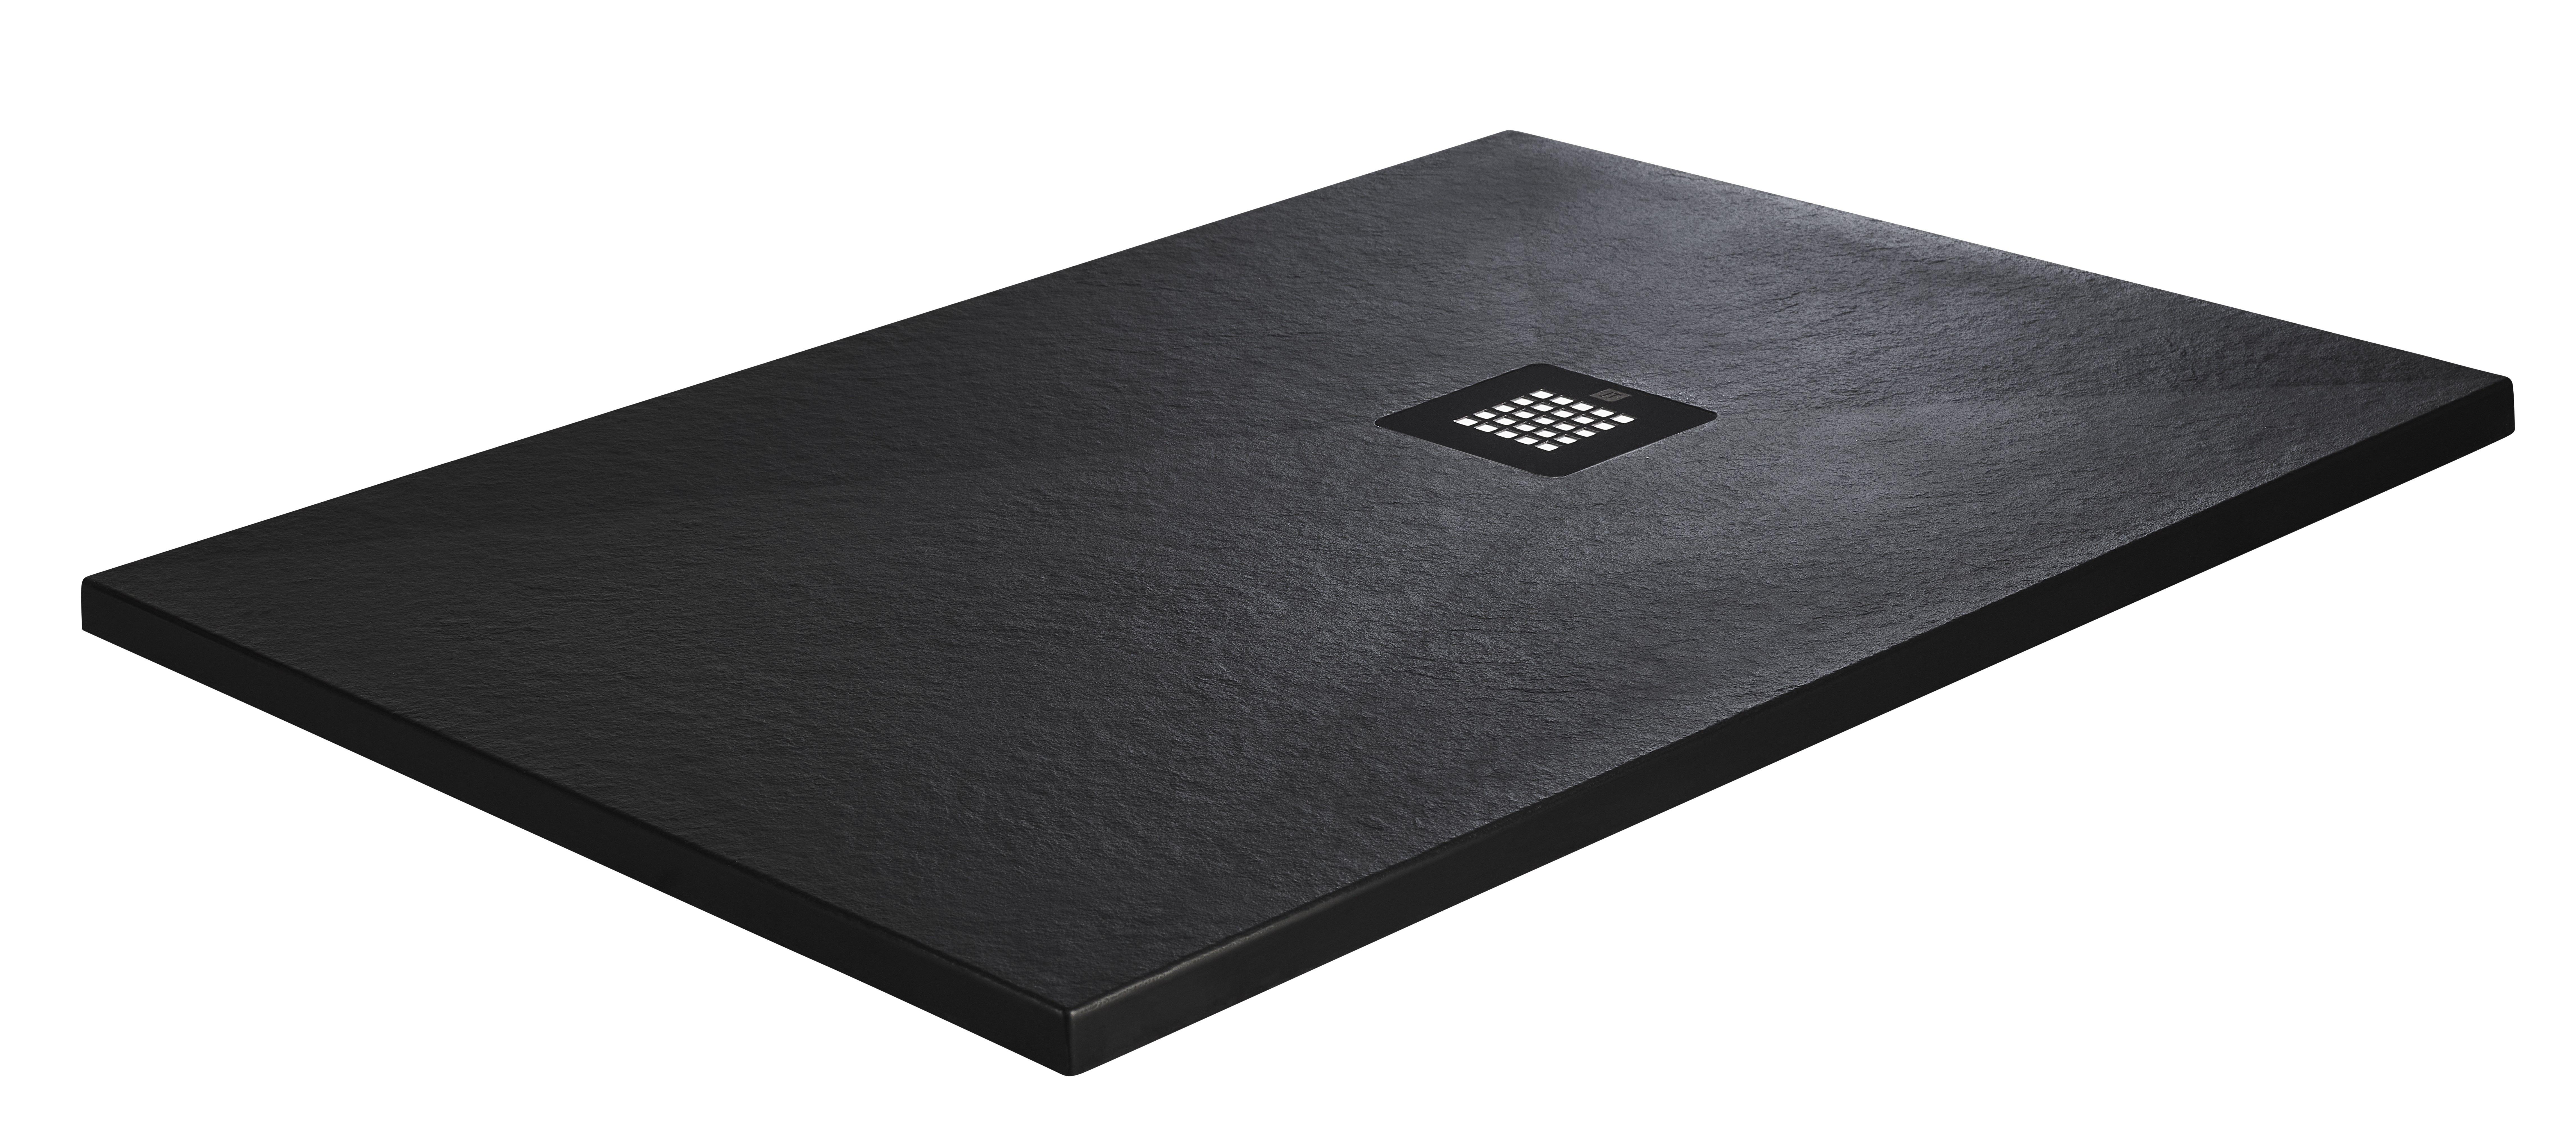 Just Trays Natural Flat to Floor Square Shower Tray 900mm Haworth Matt Black (Only Image Currently Available) [NTL90010]